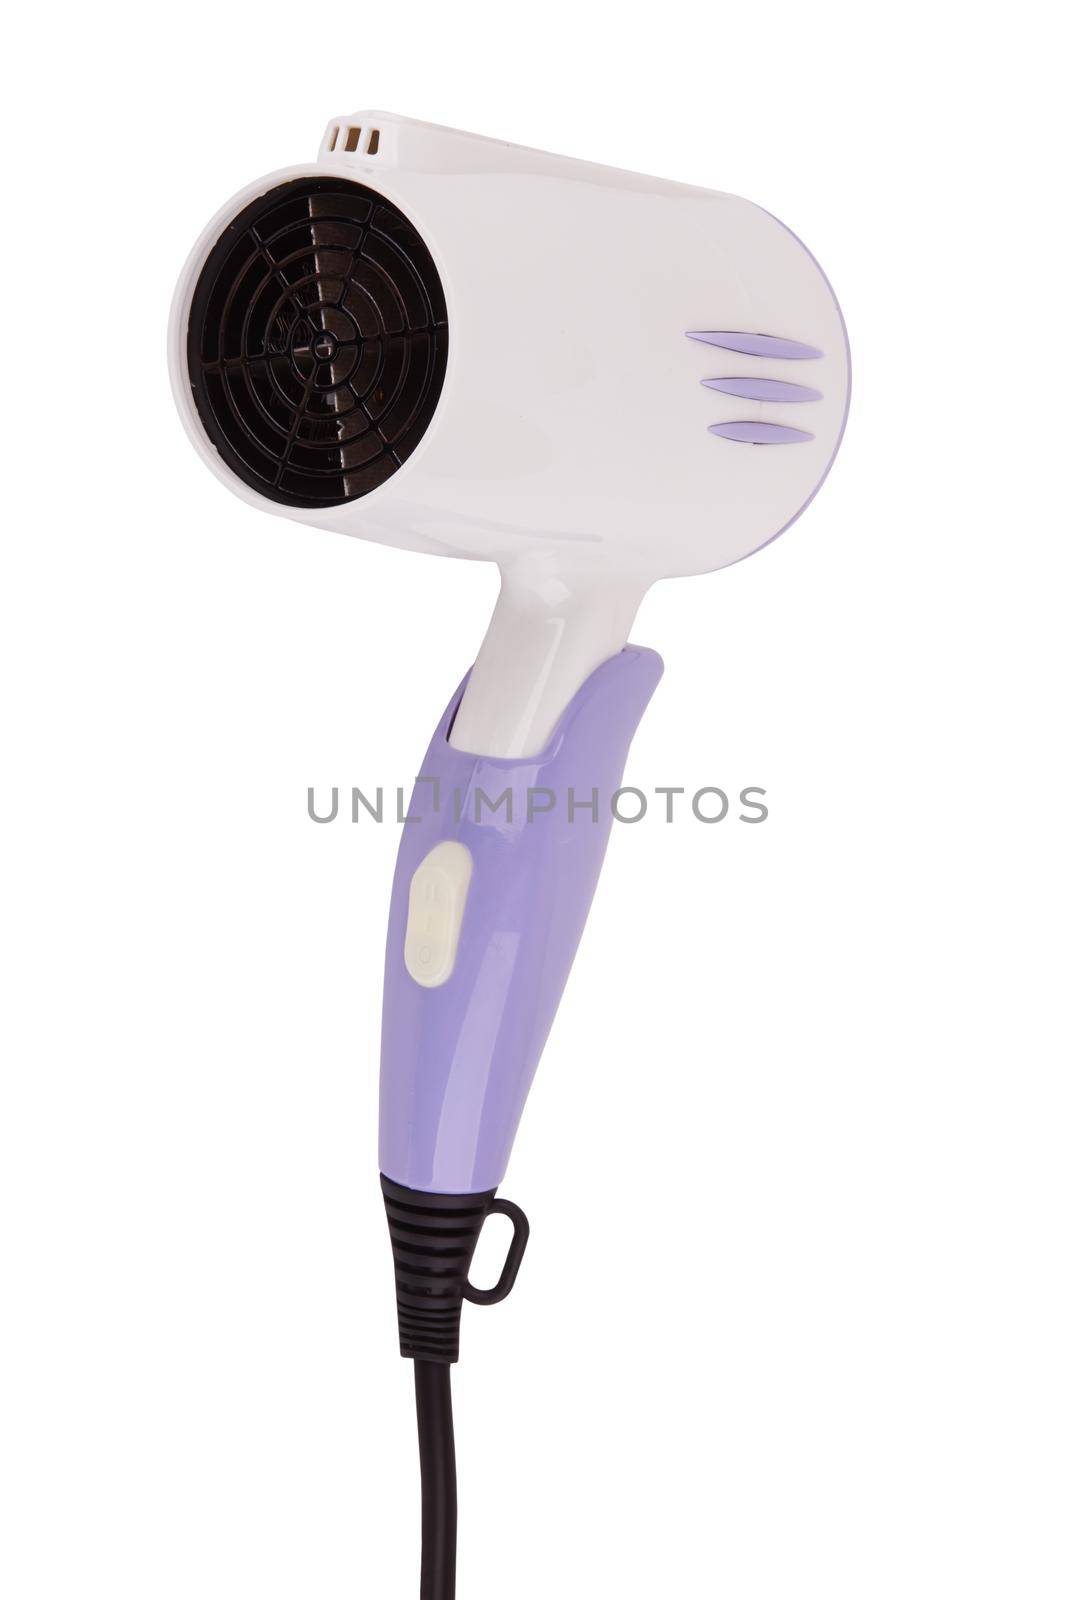 Hair dryer isolated on a white background